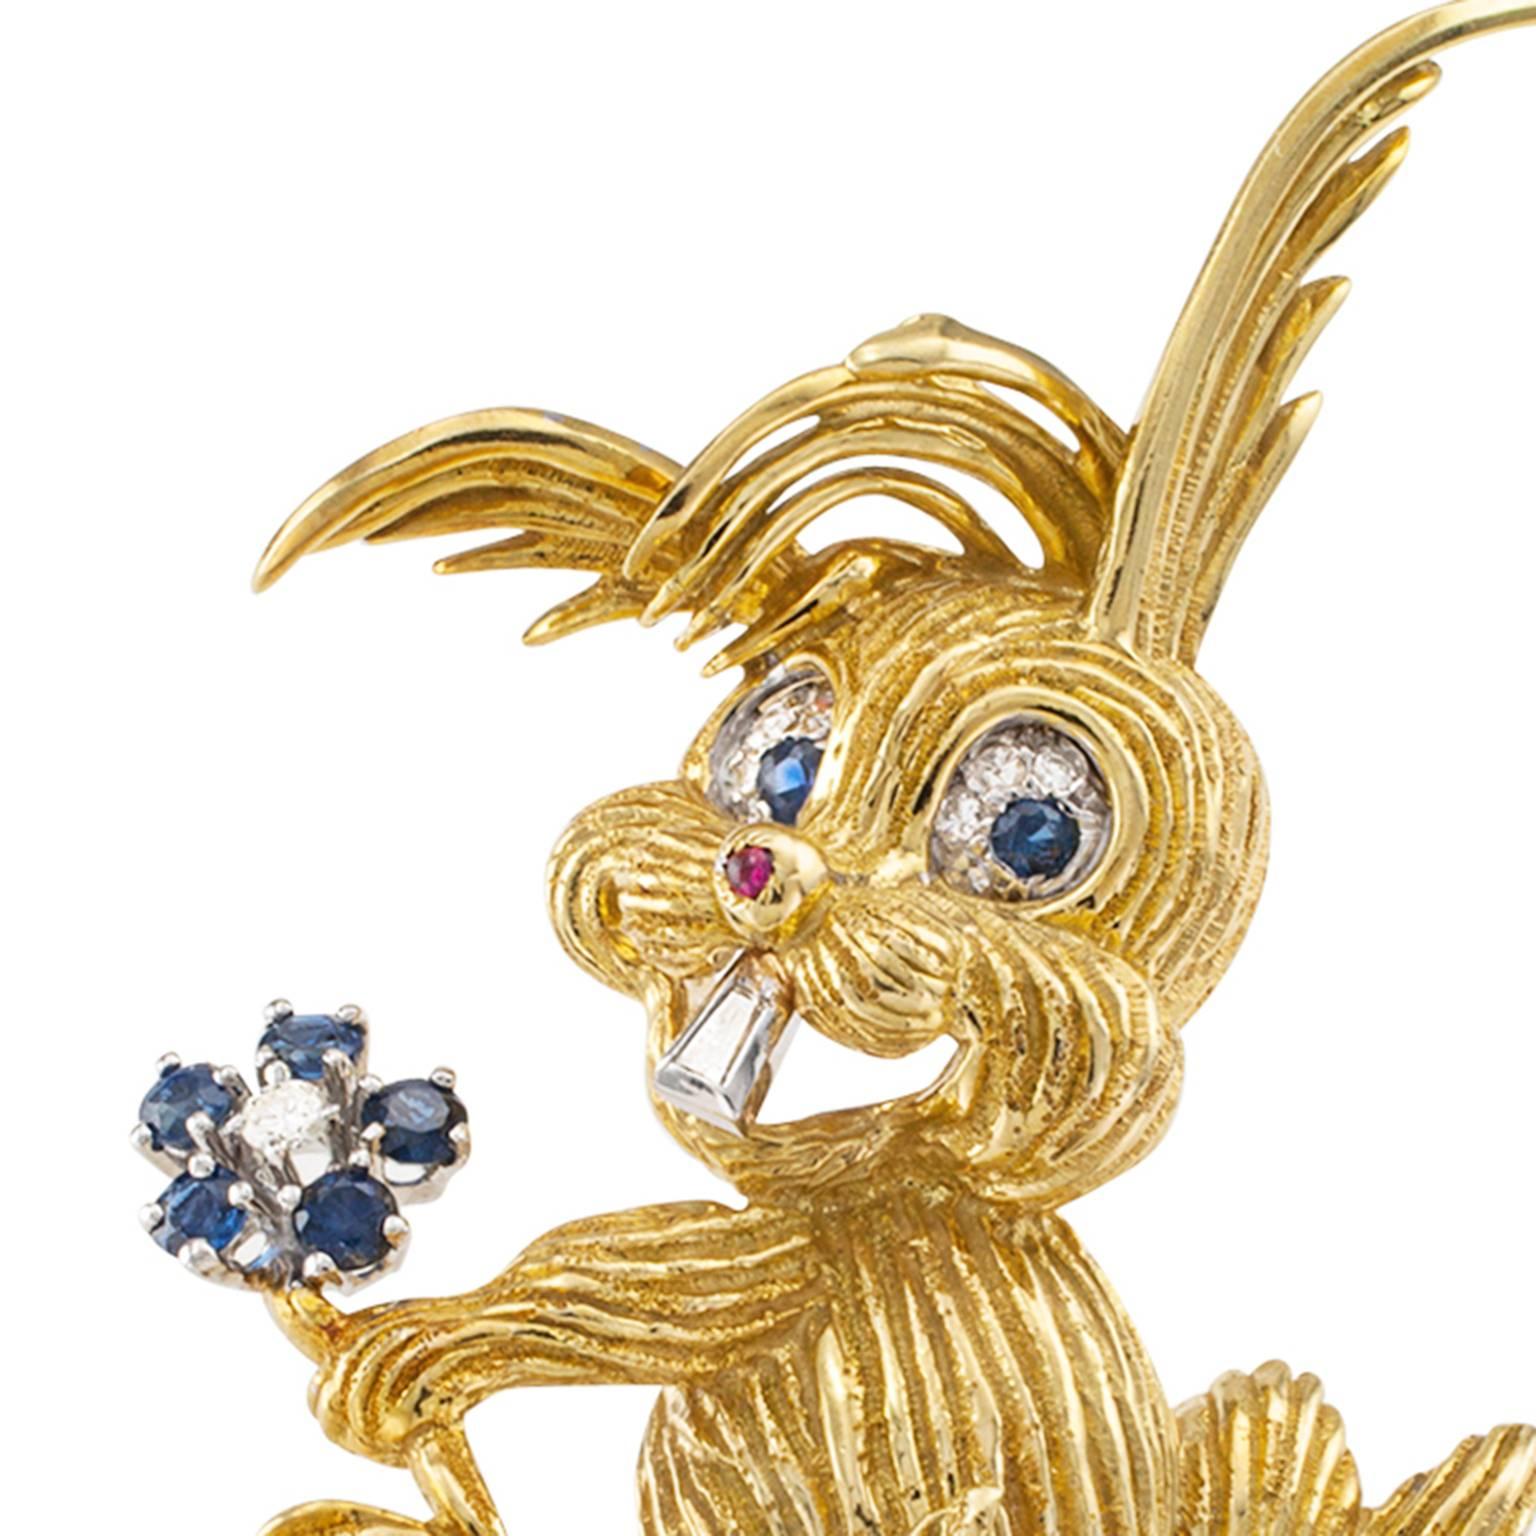 Happy-Go-Lucky Diamond and Sapphire Bunny Brooch

Look at that face.  Just look at it.  Look at that fabulous face... Happily hopping along, flower in paw, smiling like sunshine and bright blue eyes that sparkle like diamonds!  This bunny brooch